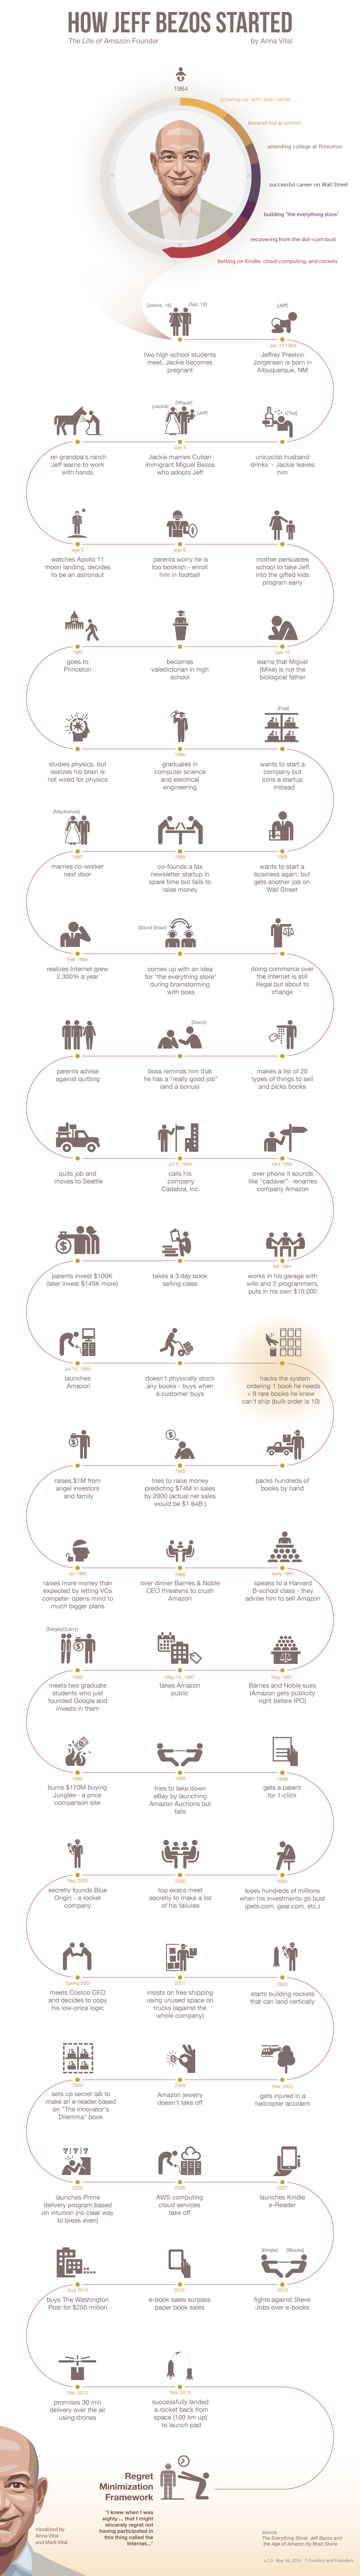 How Jeff Bezos Started Infographic